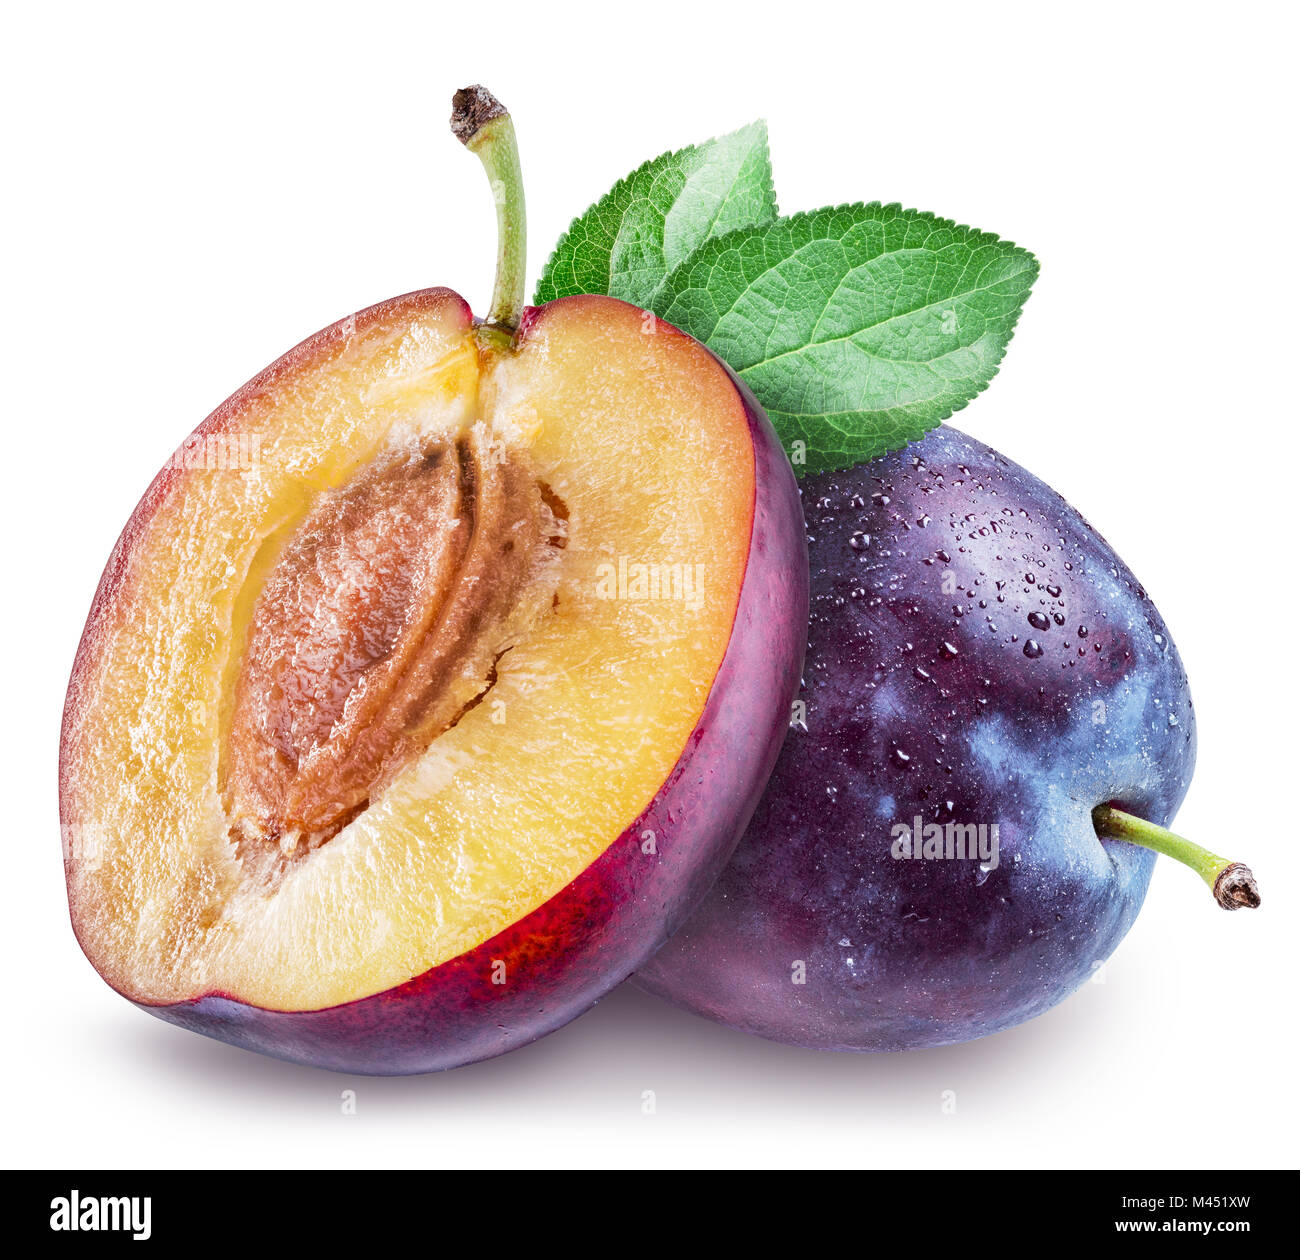 Plums with water drops. File contains clipping path. Stock Photo